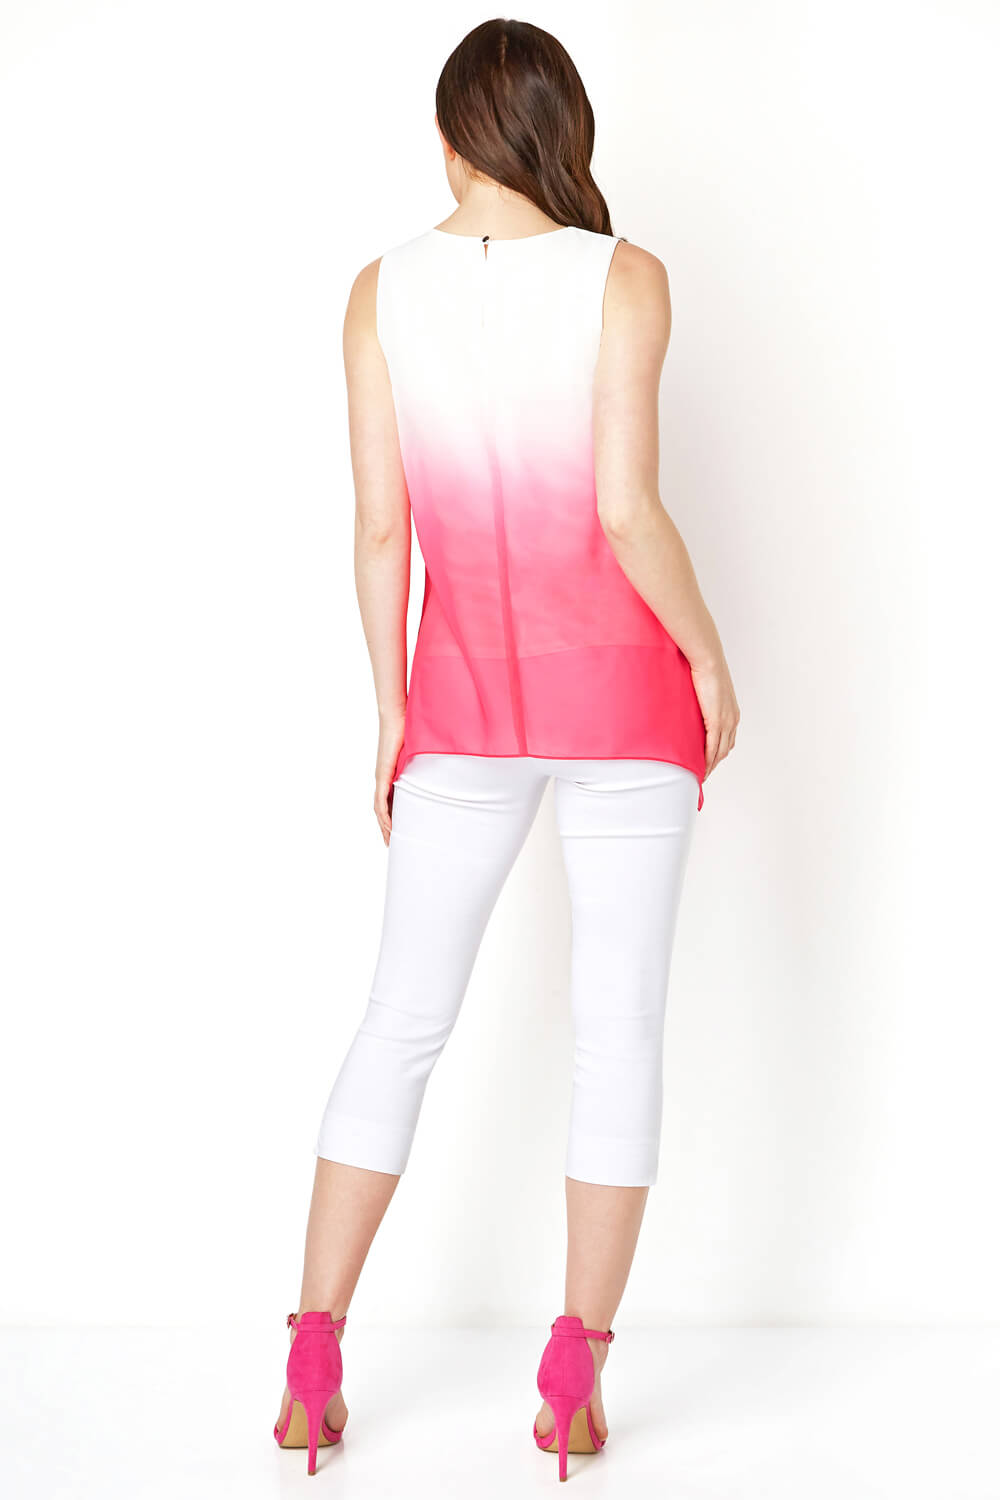 PINK Ombre Print Overlay Top, Image 3 of 8